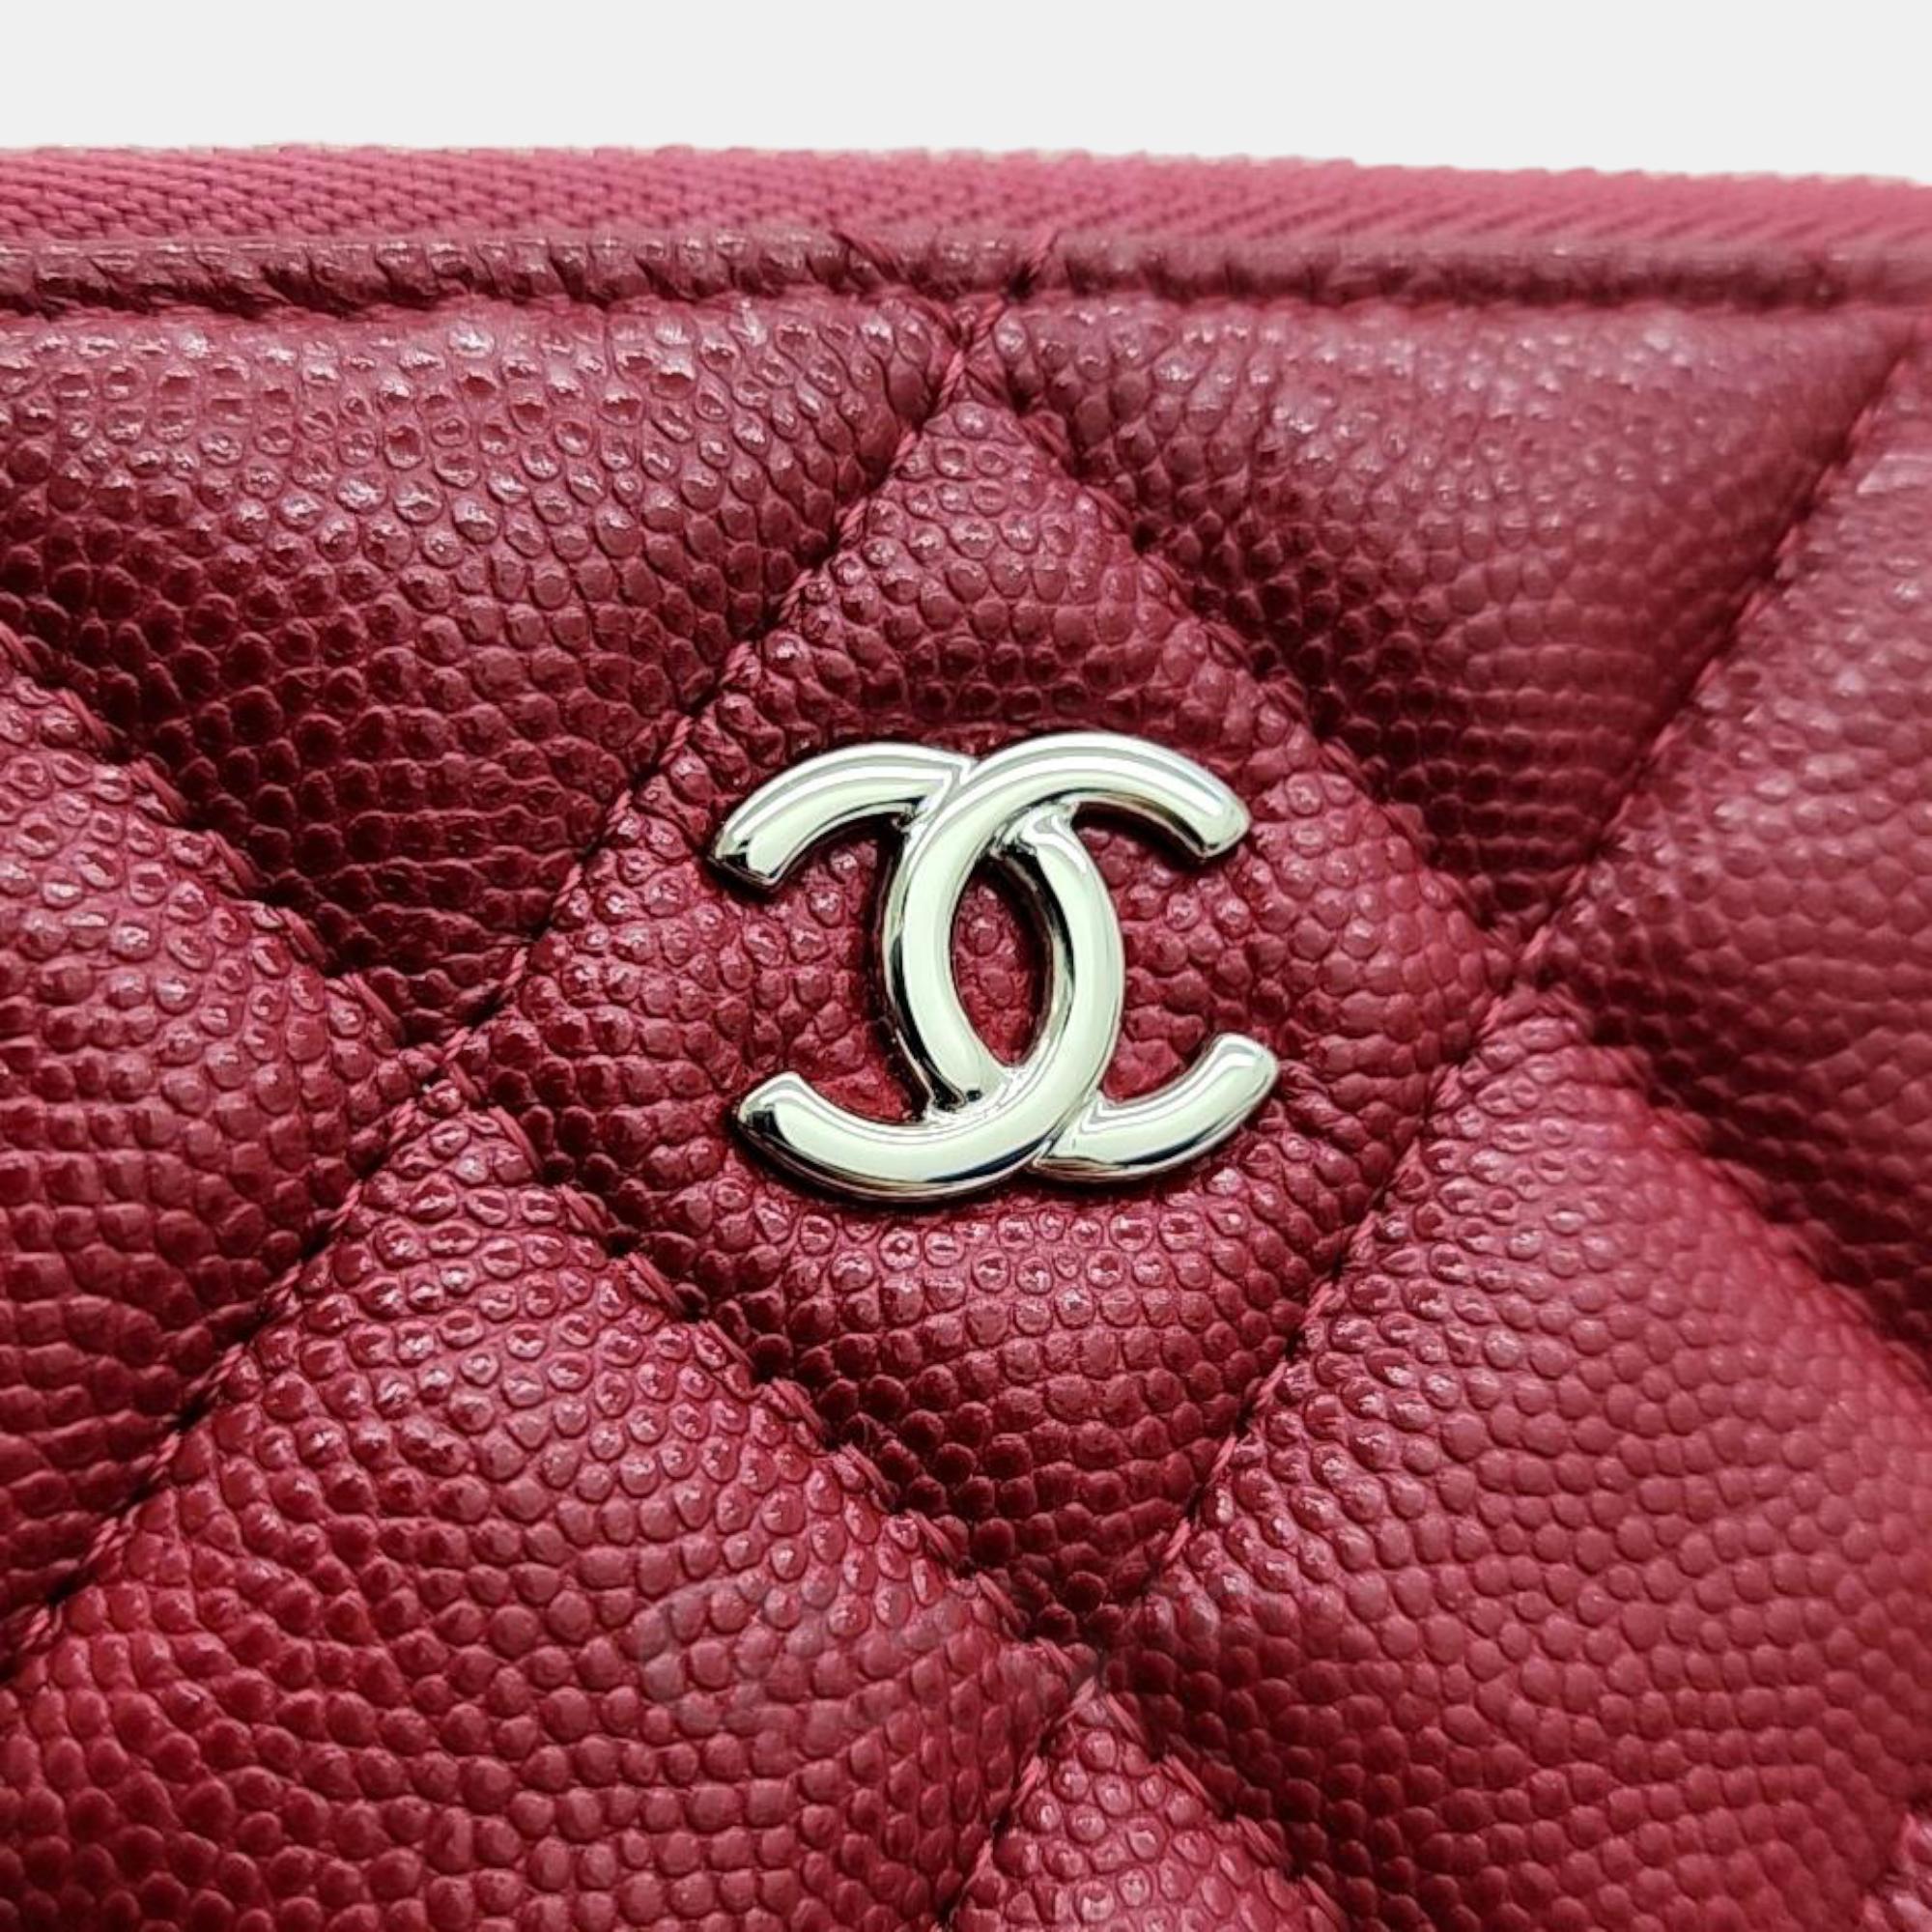 Chanel Red Leather CC Clutch